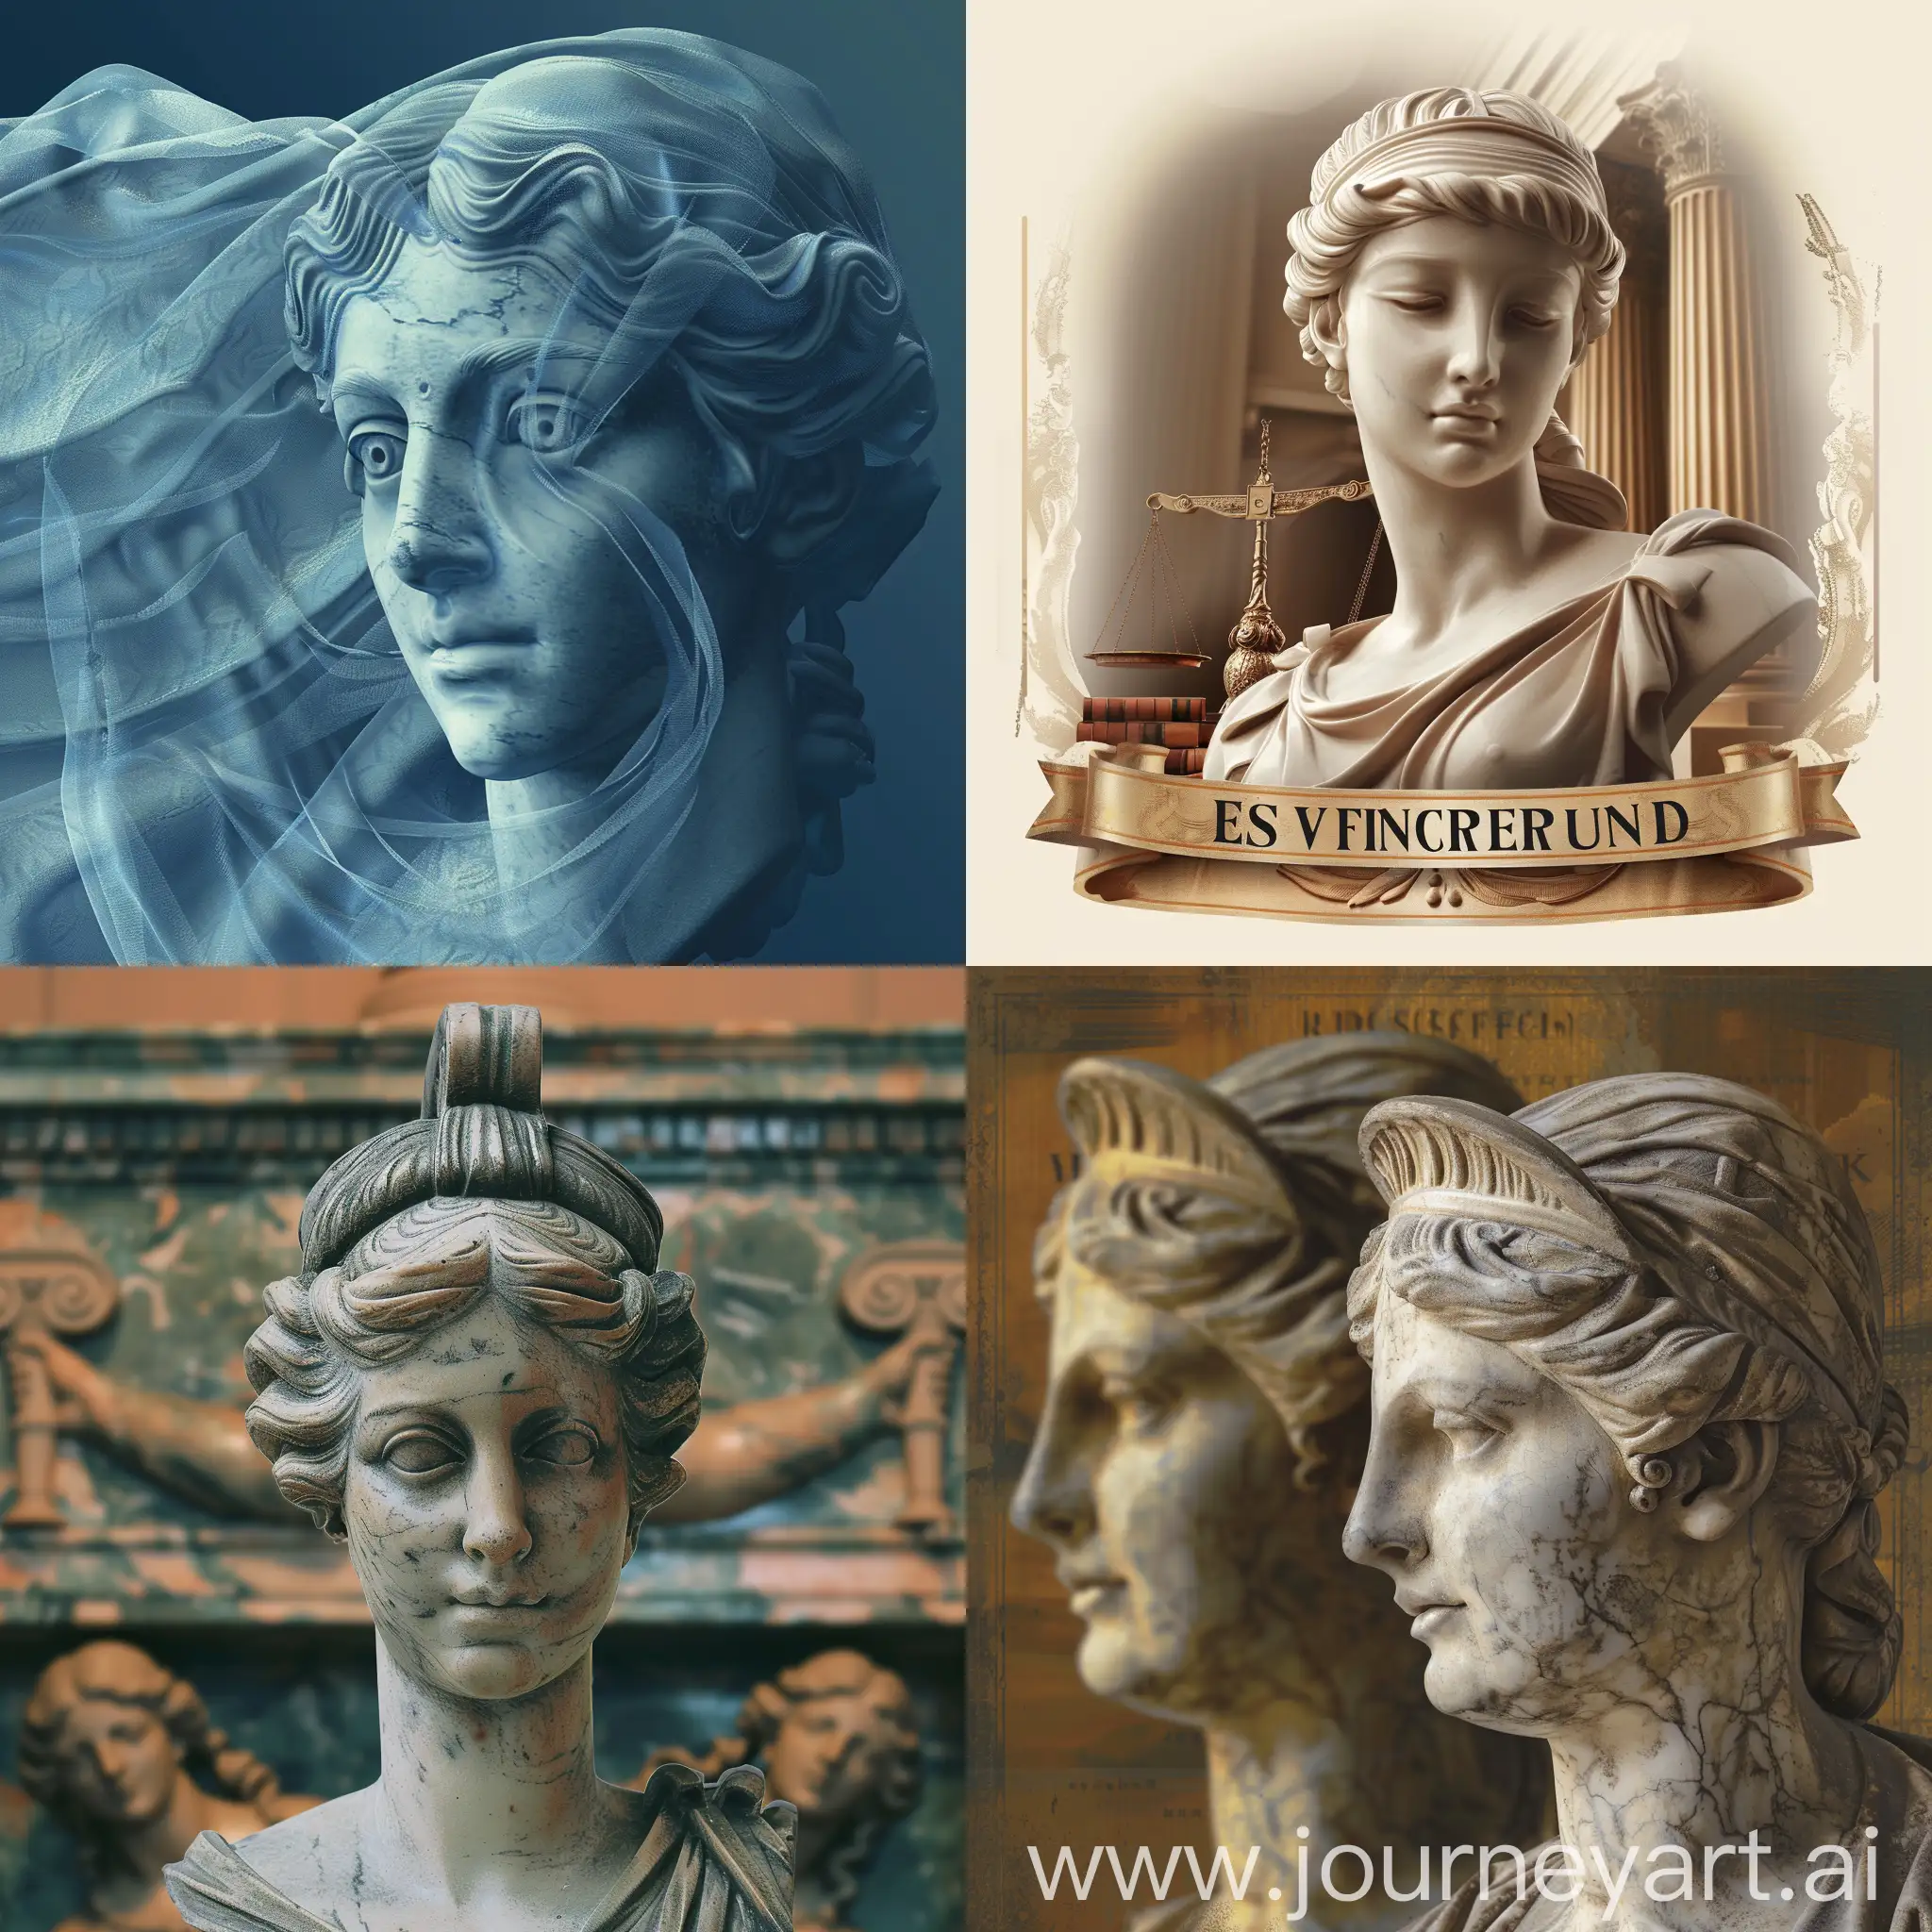 create the womens head statue from the background of the banner from the previous suggestion for legal firm website.
